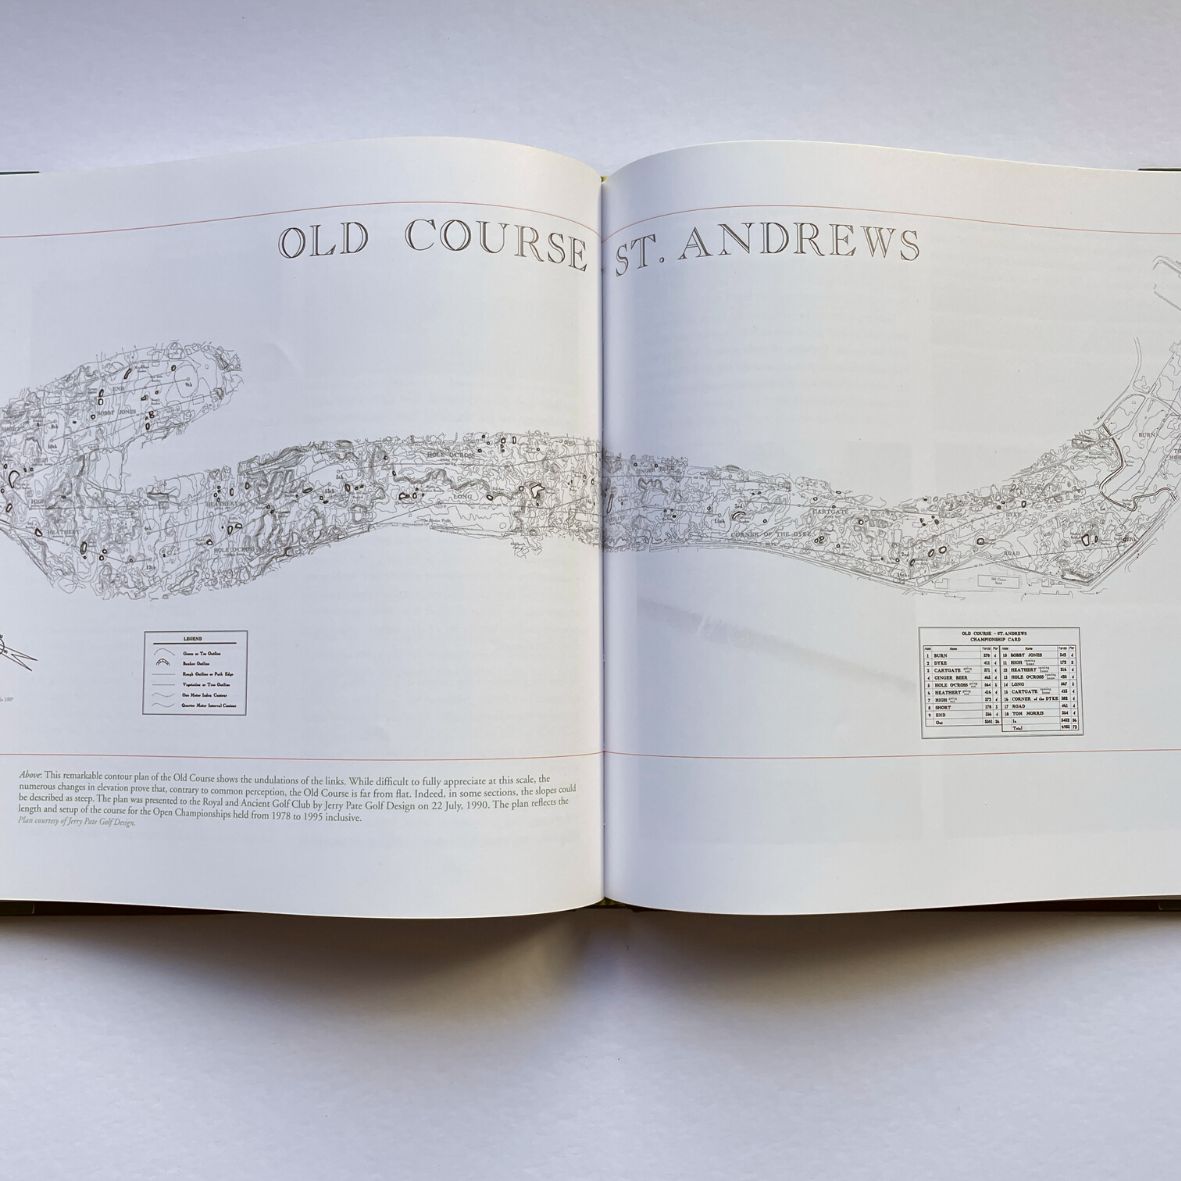 St Andrews, The Evolution Of The Old Course - Signed First Edition